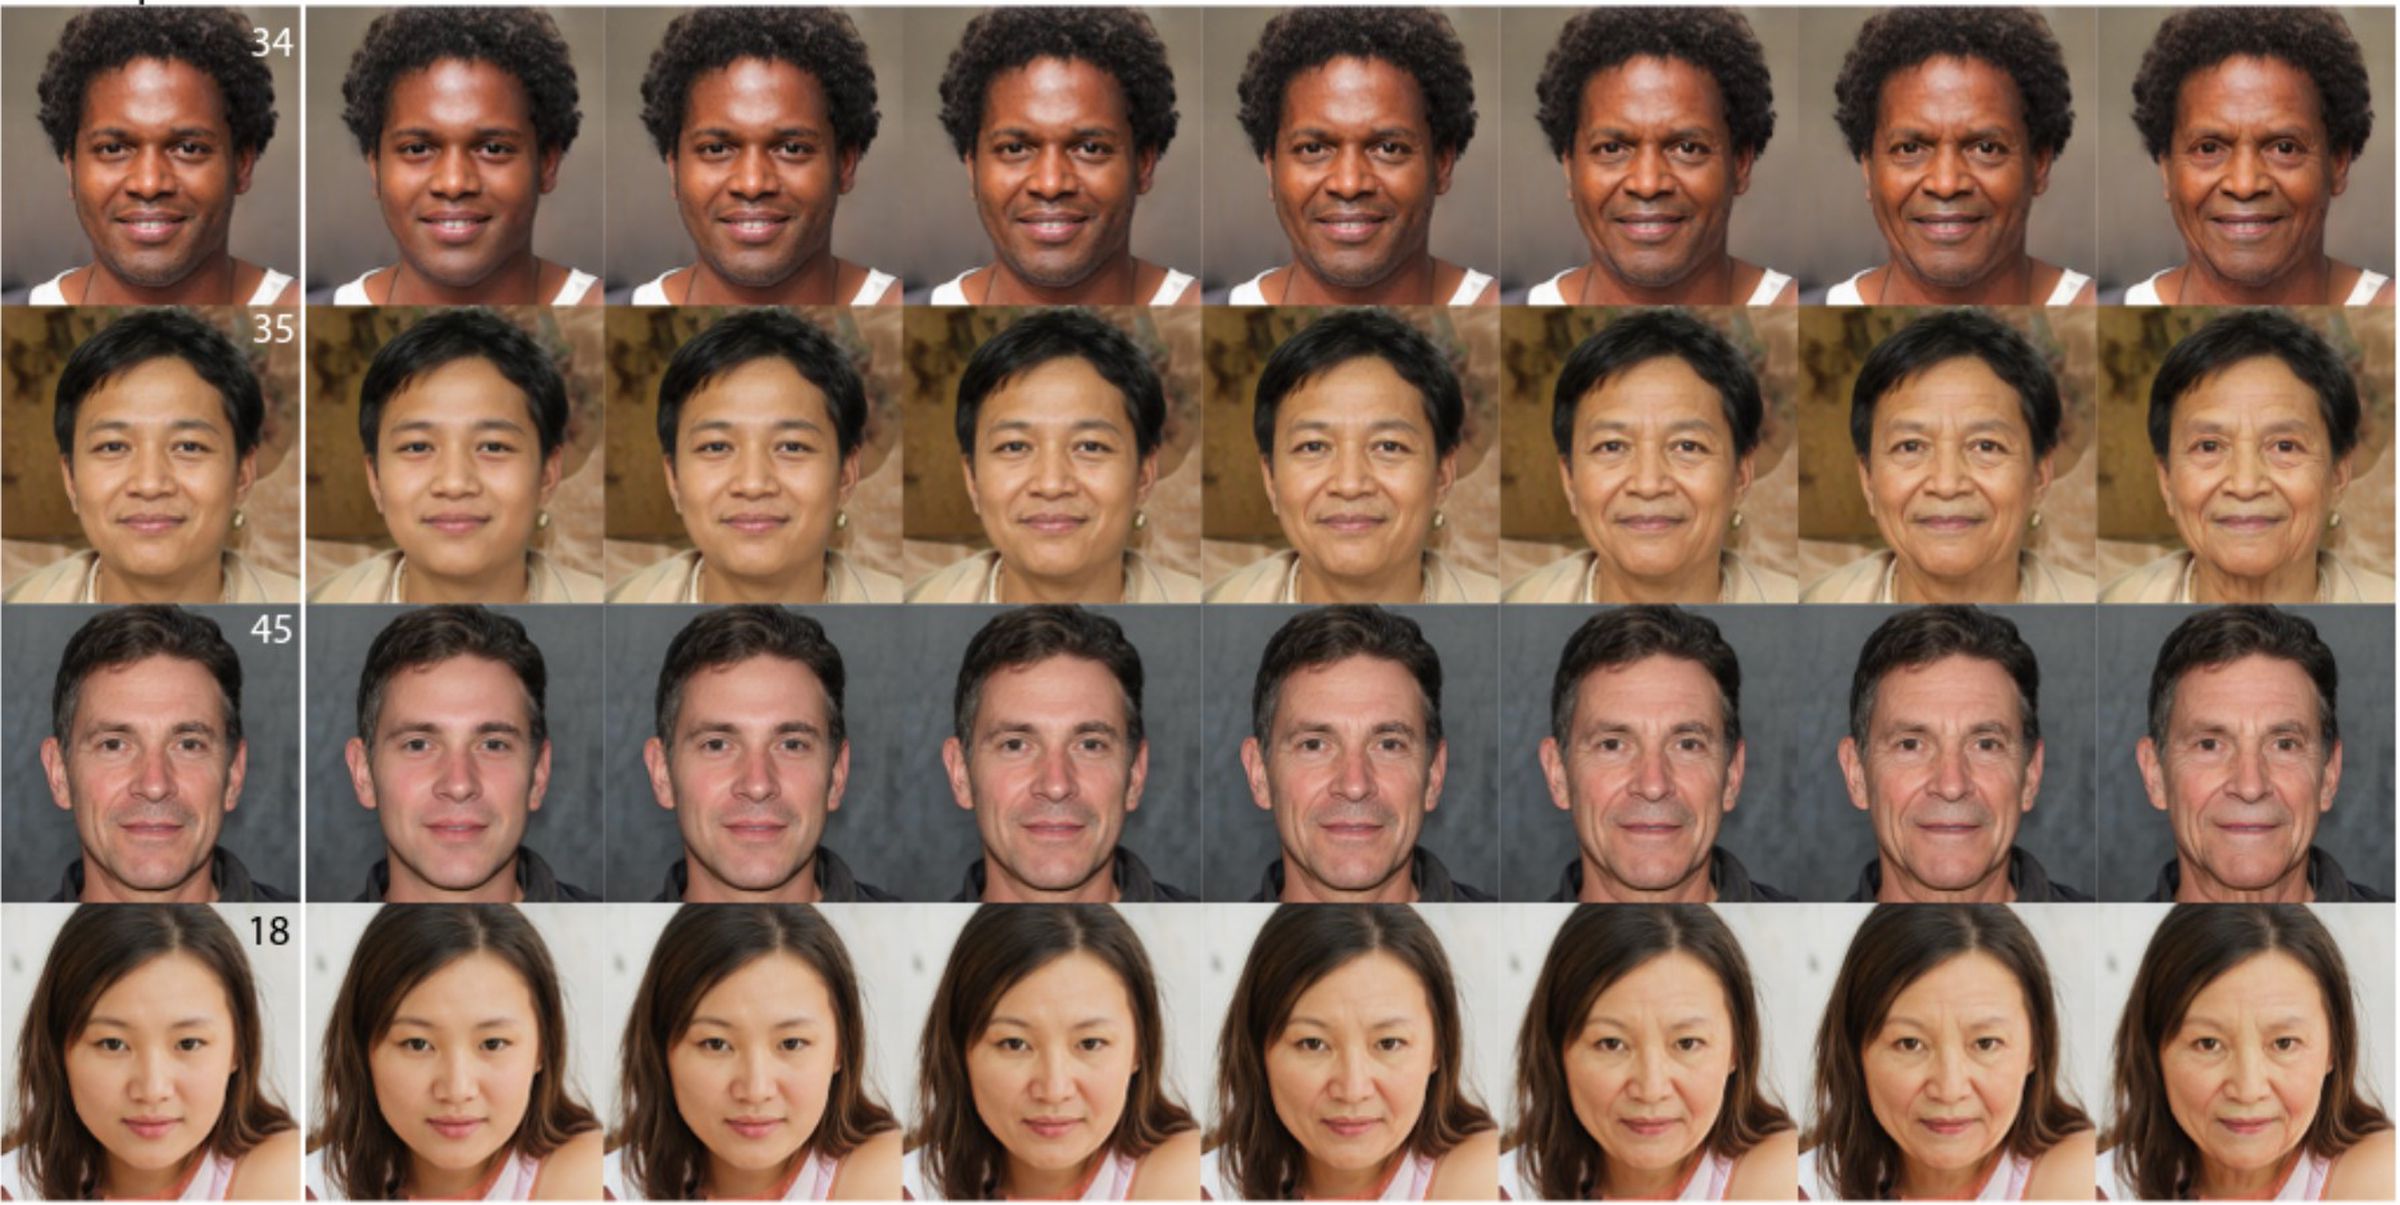 Rows of digitally created images of human faces at different ages